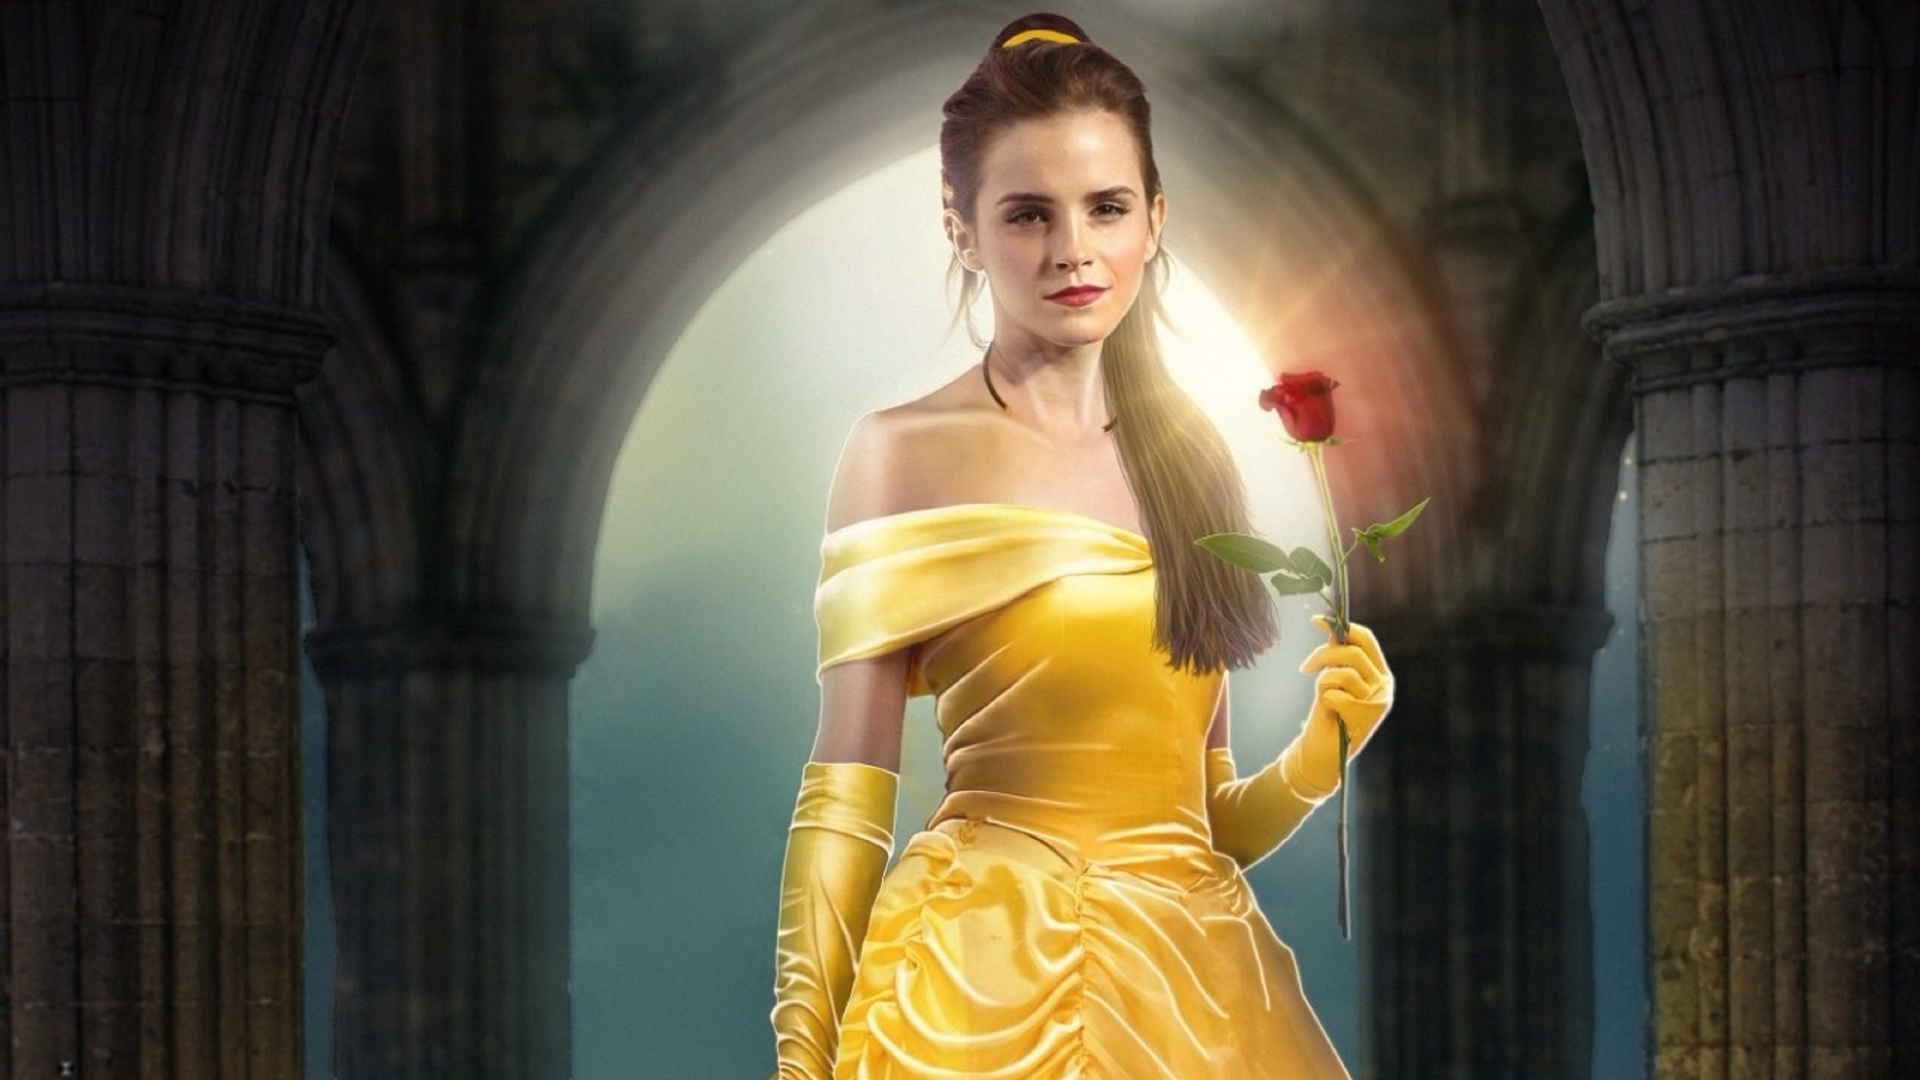 Beauty And The Beast 2017 Belle Beauty And The Beast Emma Watson Movie 1920x1080